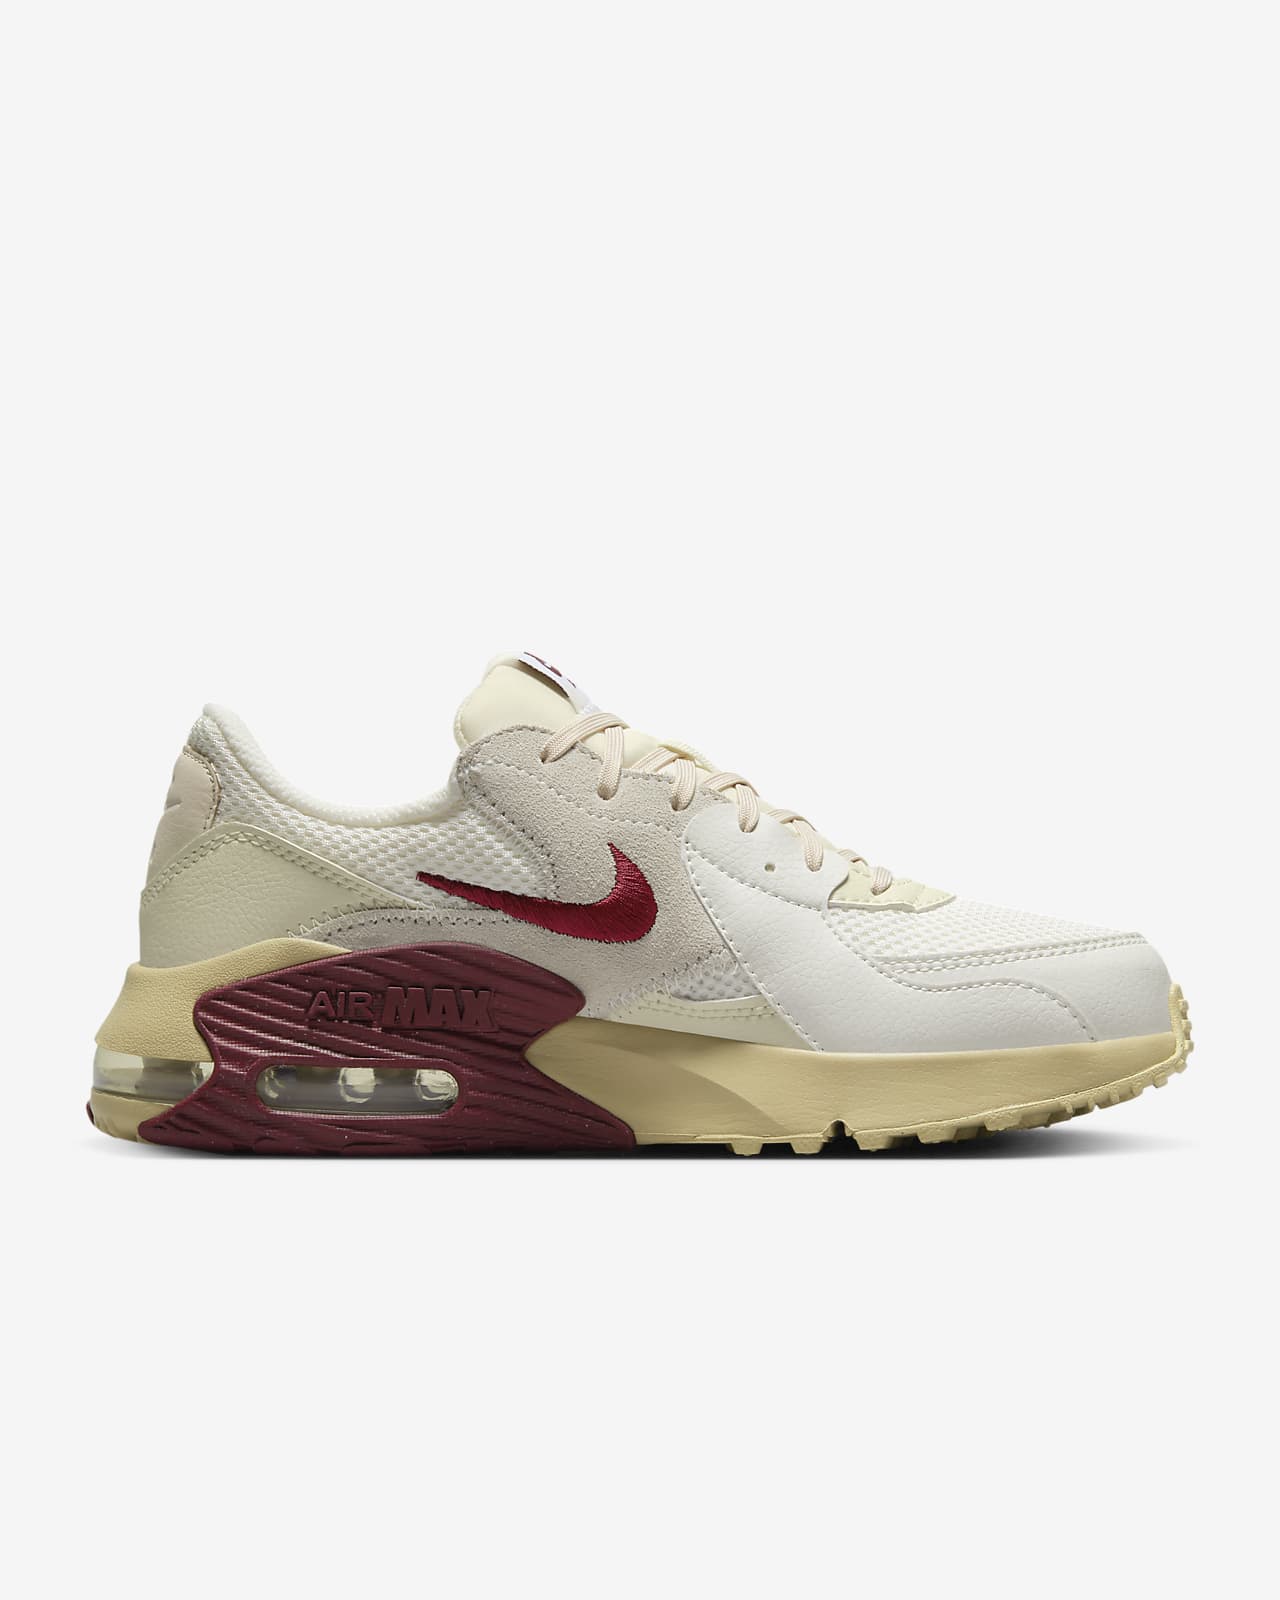 women's nike air max excee red